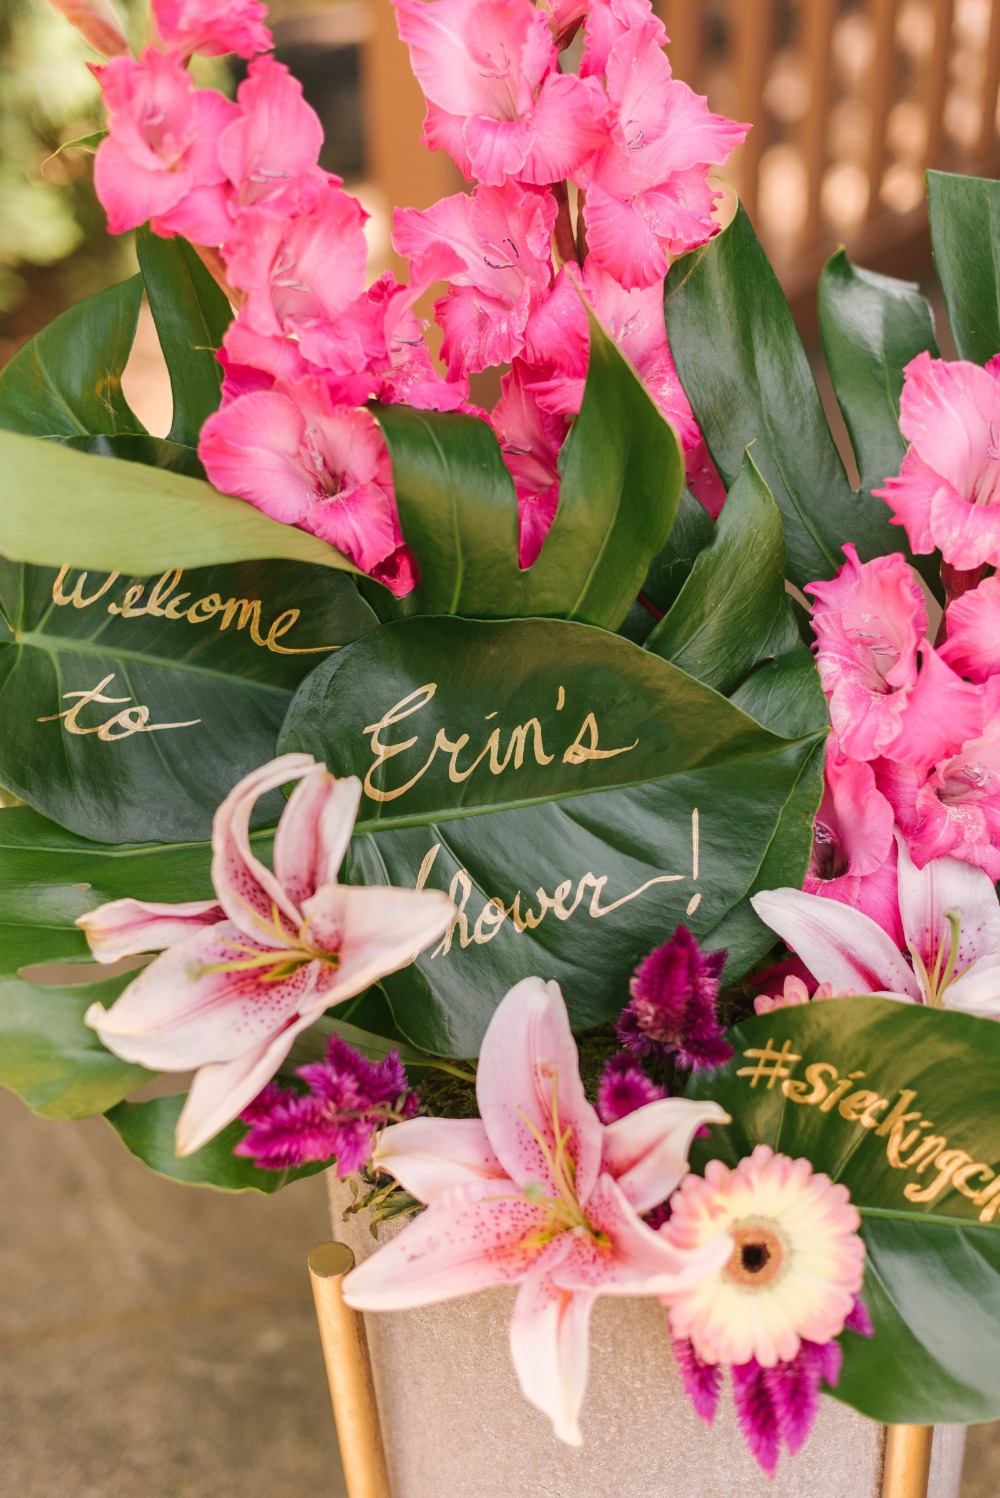 Welcome floral arrangement and tropical bridal shower